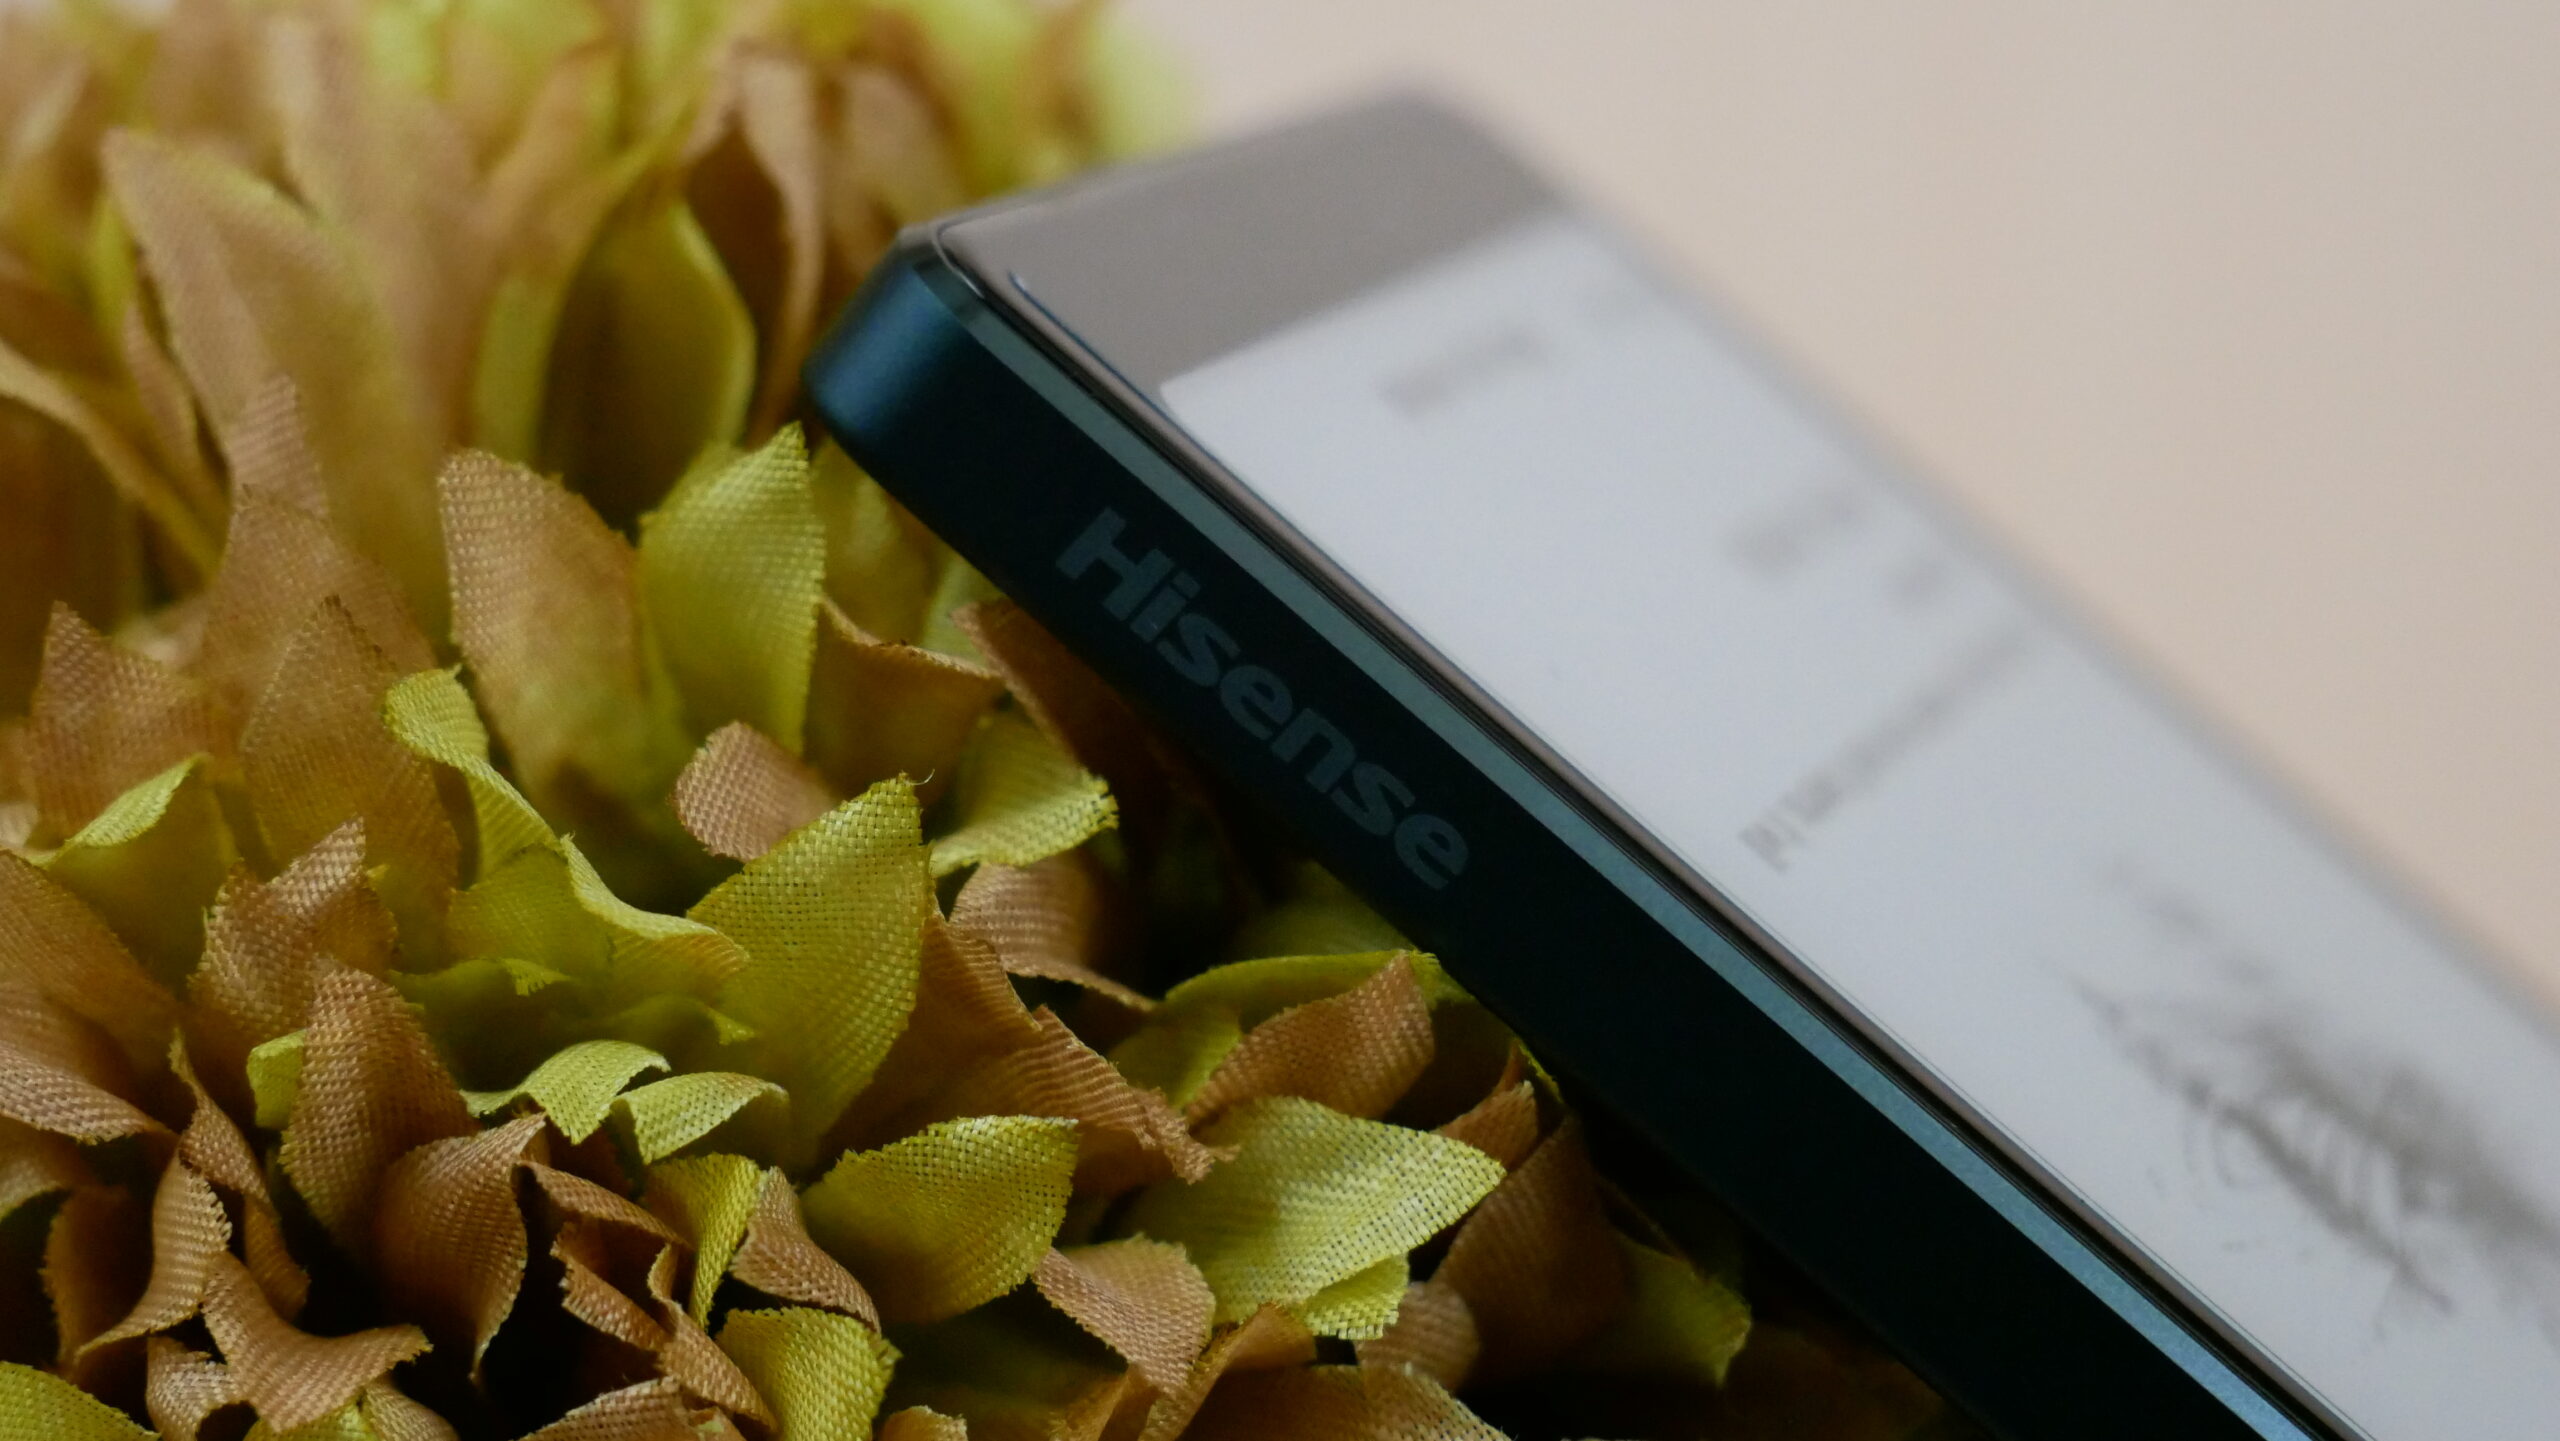 | Hands on Review of the Hisense Touch Lite Music Player - Good e-Reader